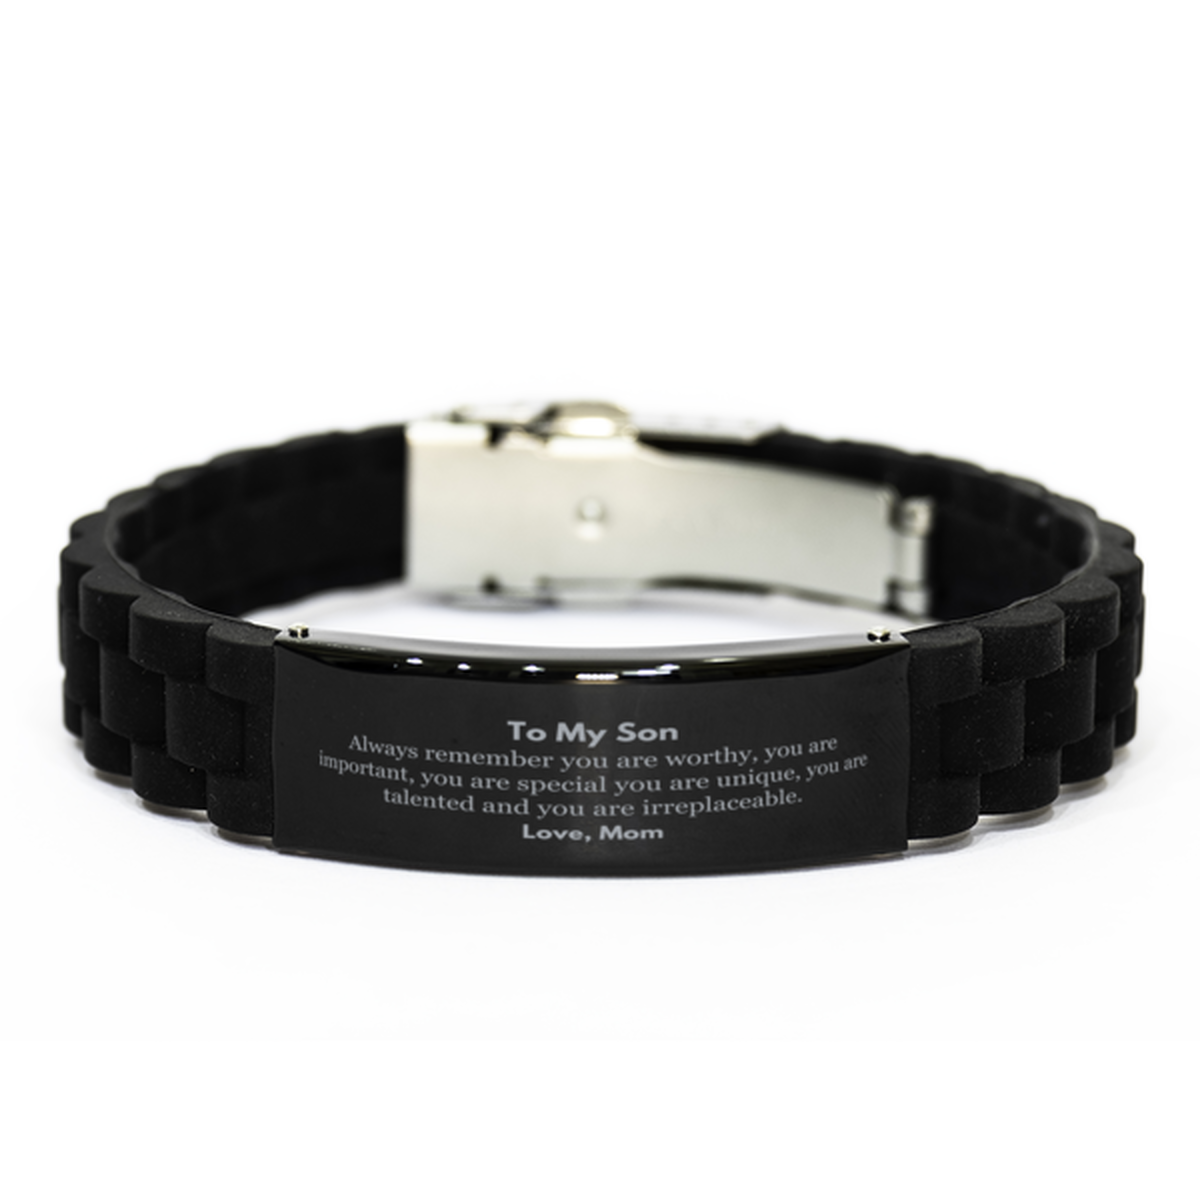 Son Birthday Gifts from Mom, Inspirational Black Glidelock Clasp Bracelet for Son Christmas Graduation Gifts for Son Always remember you are worthy, you are important. Love, Mom